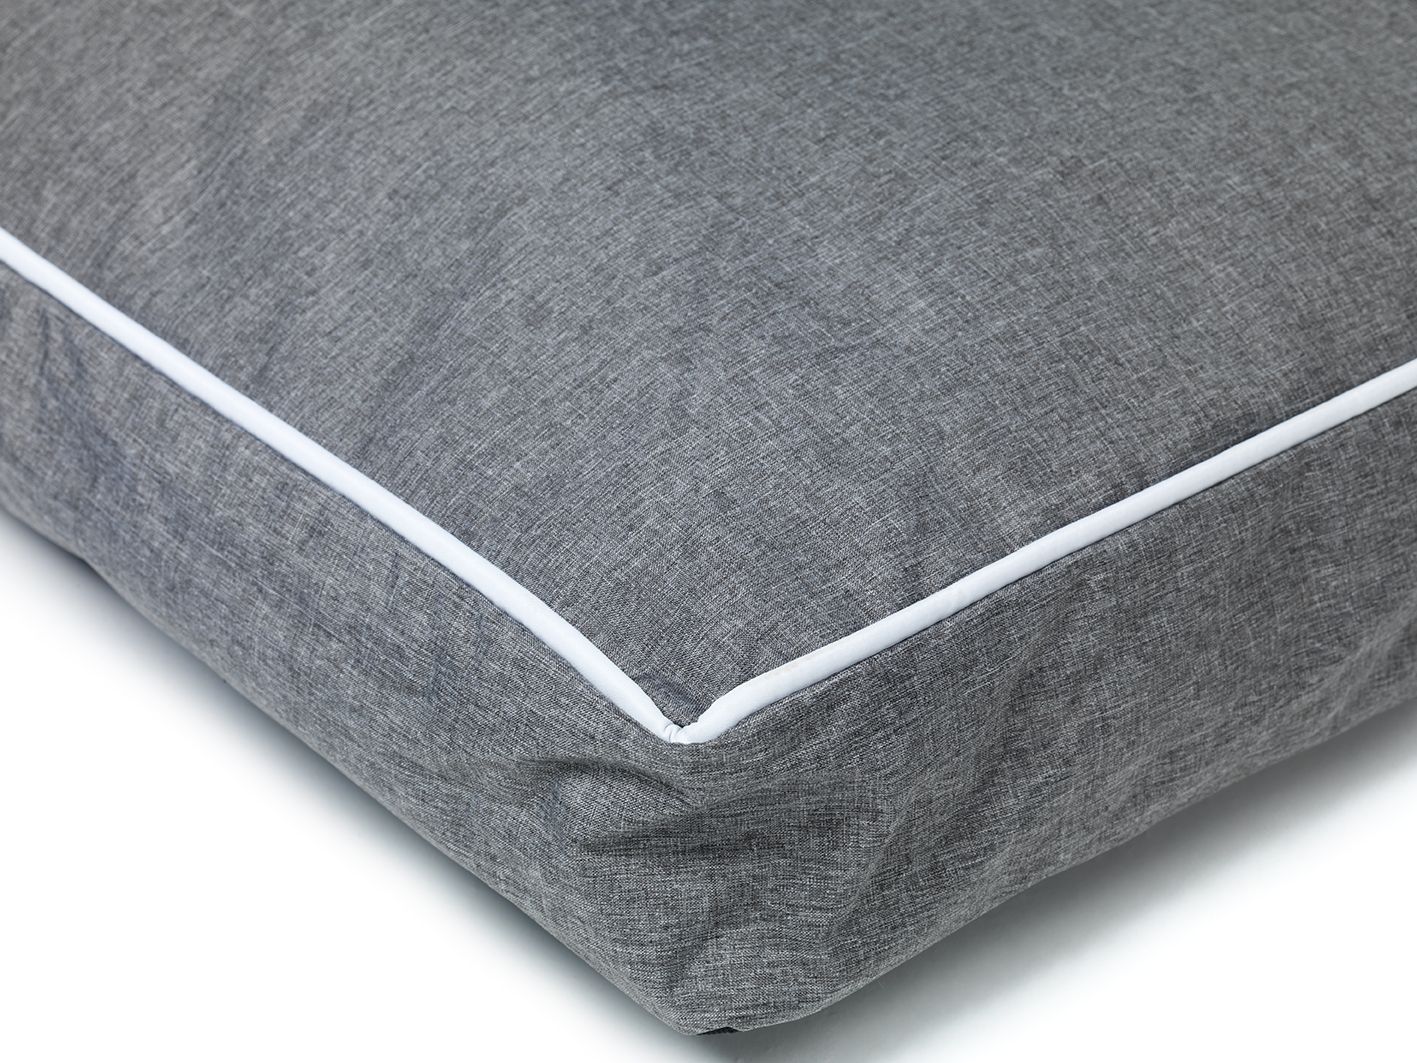 Dogman Dog Bed Buddy Cushion - Gray - different sizes